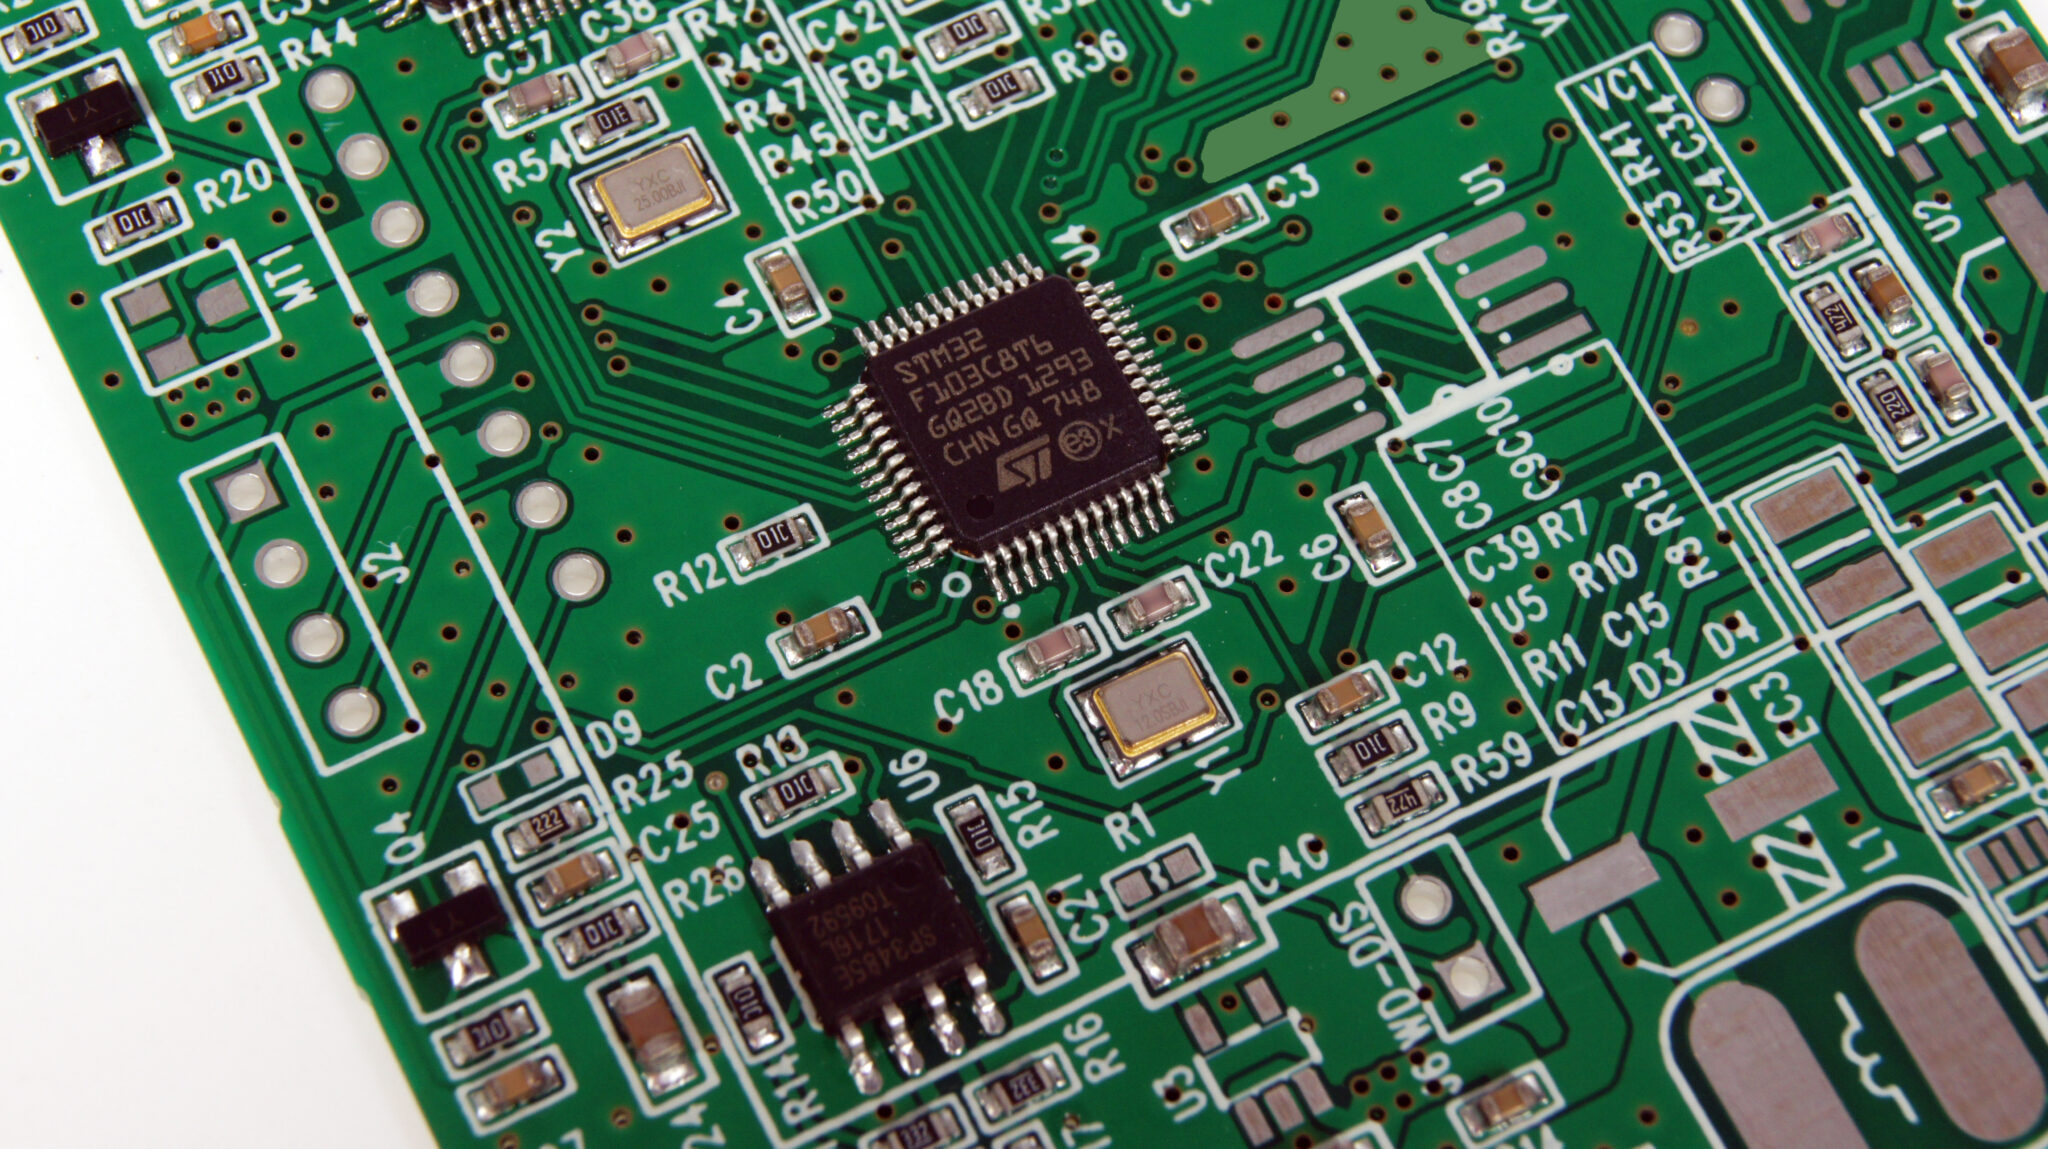 Top Reasons to Get PCBA Service From JLCPCB - The Engineering Knowledge